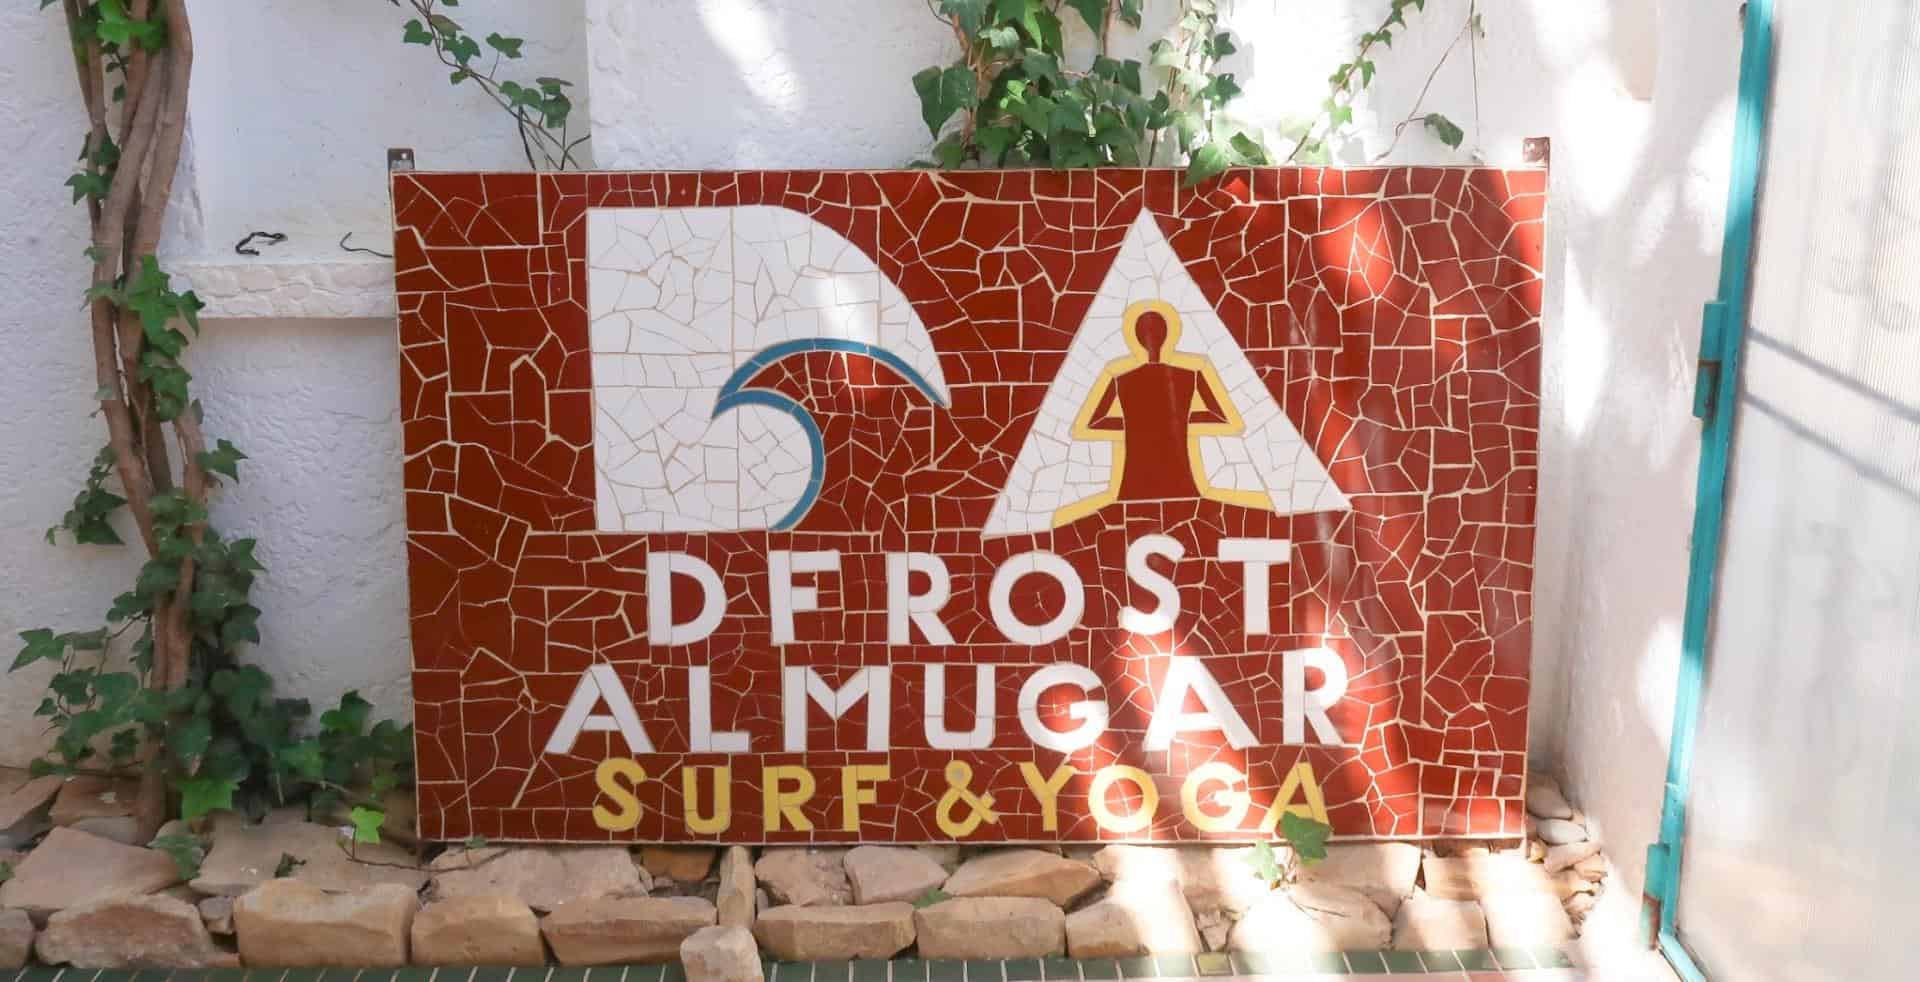 Dfrost Almugar Surf & Yoga House Review